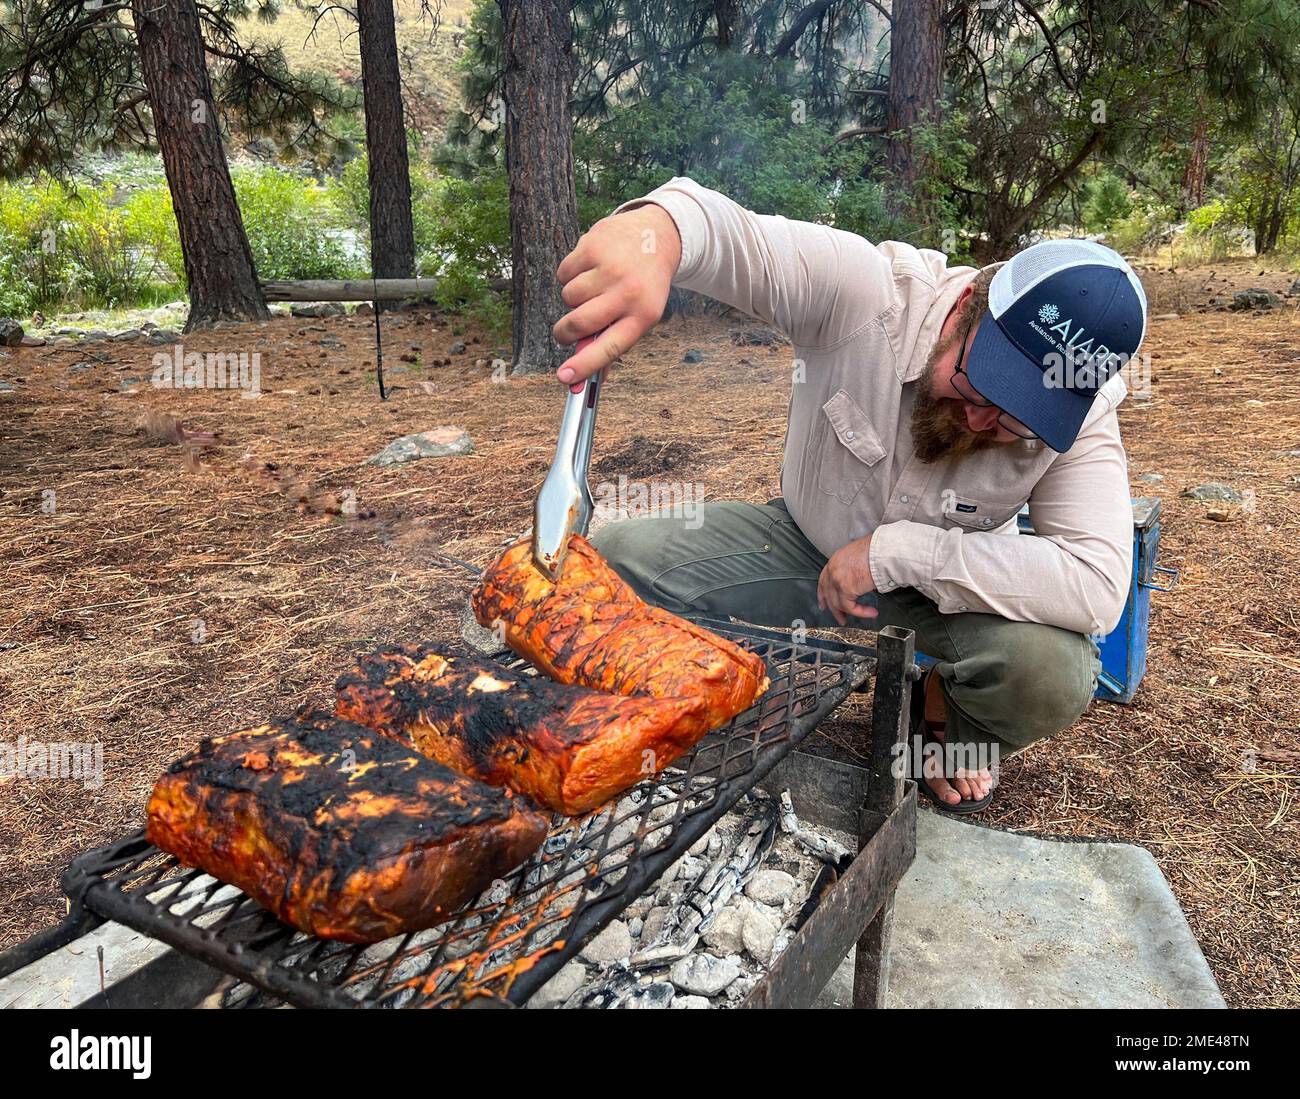 Barbecue auf dem Campingplatz am Middle Fork Salmon River in Idaho mit Far and Away Adventures. Stockfoto